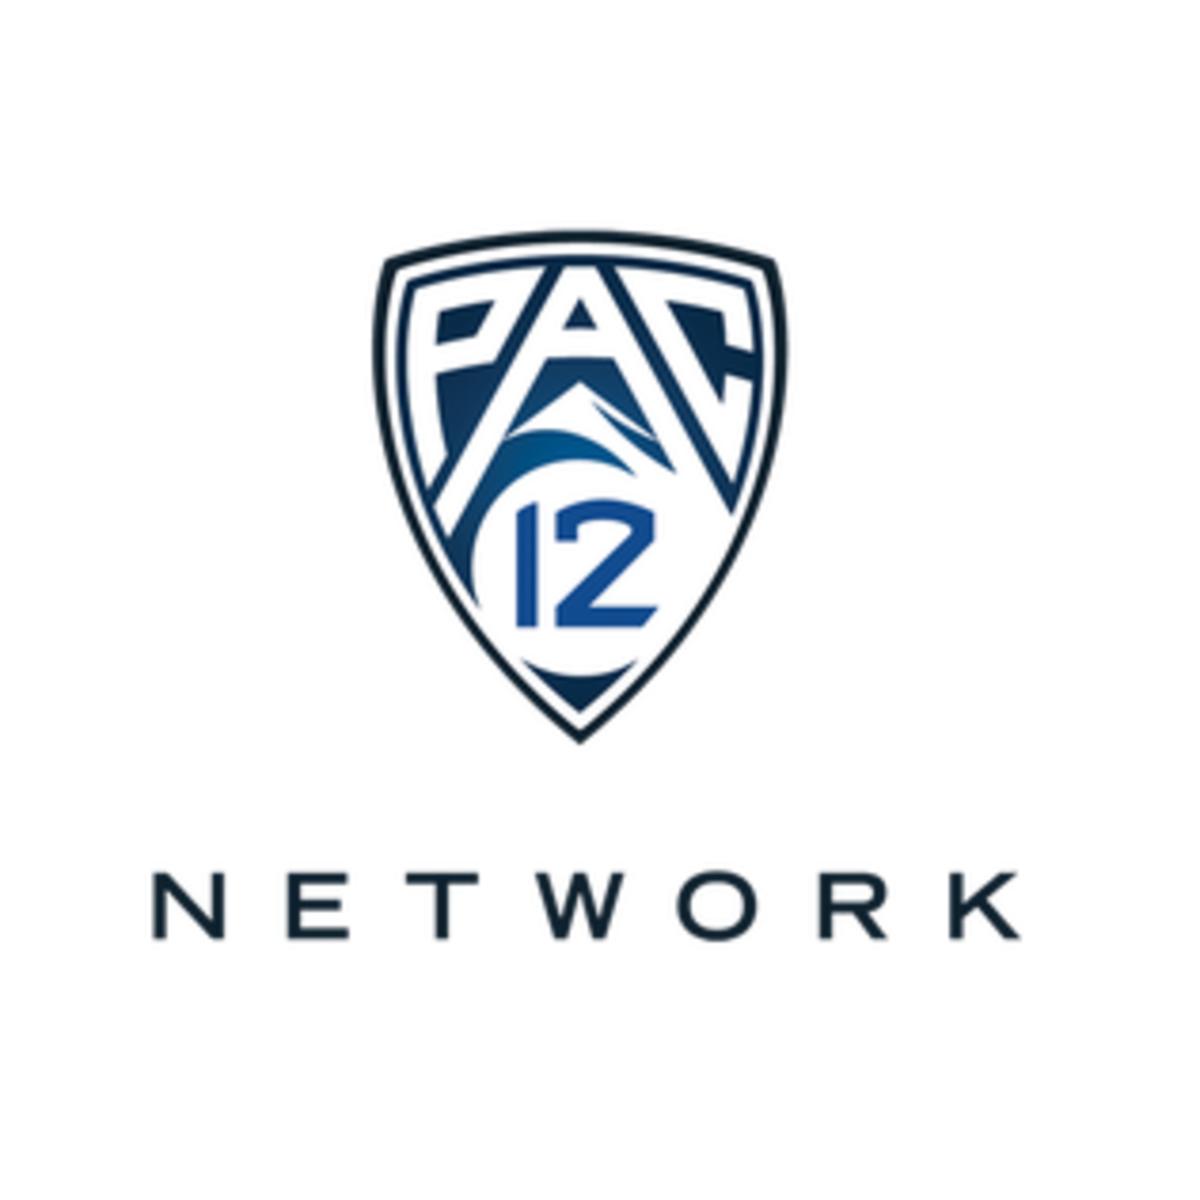 pac 12 network